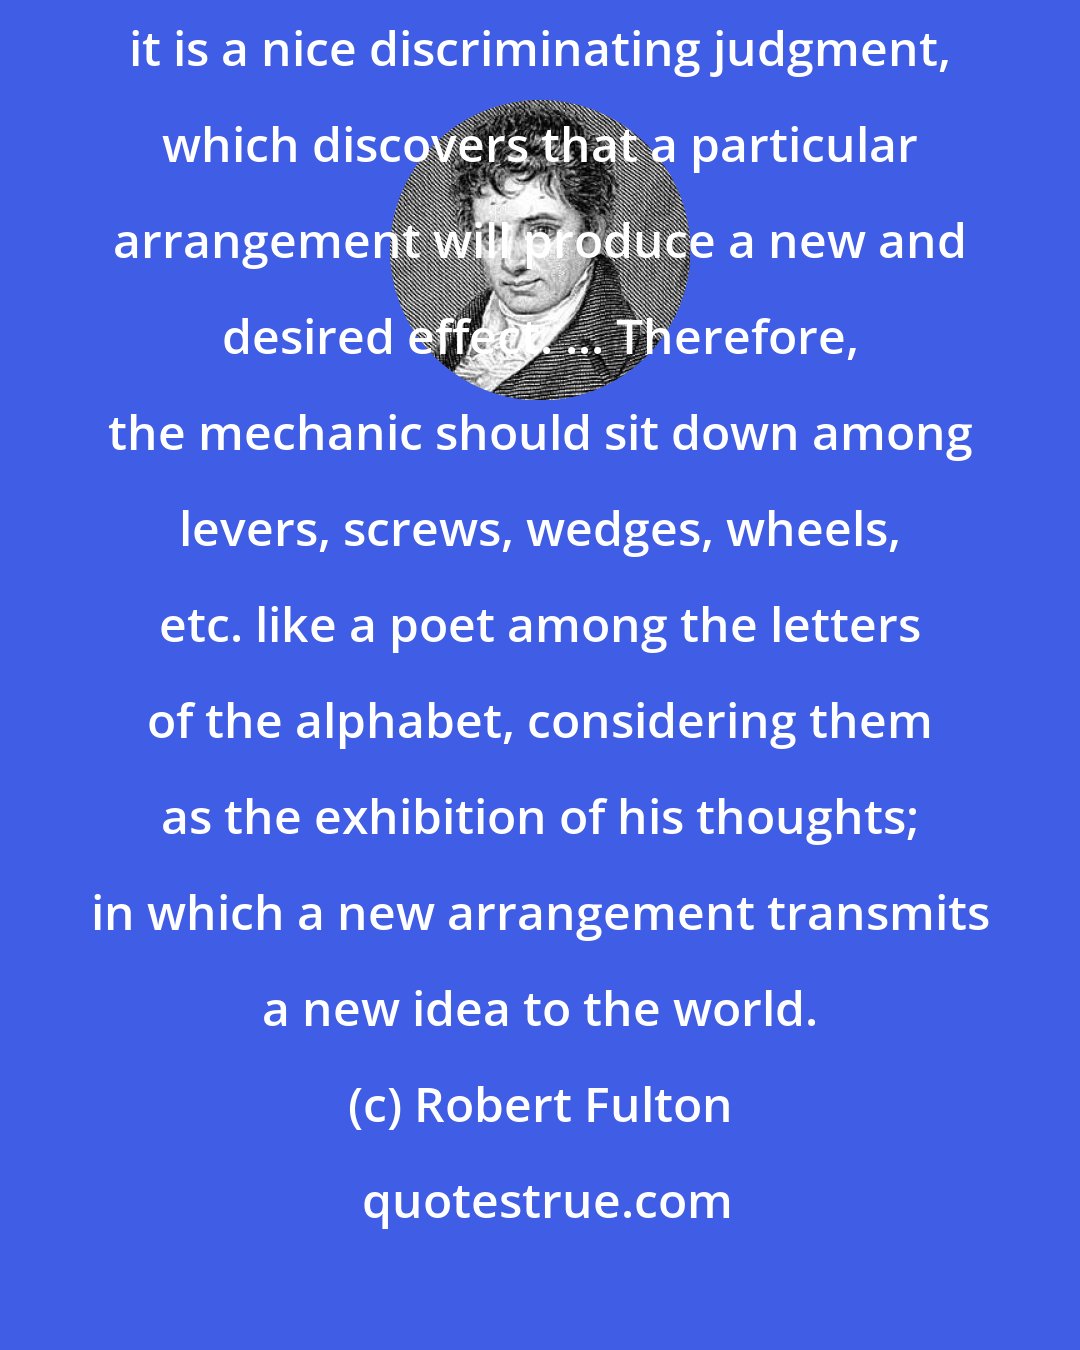 Robert Fulton: As the component parts of all new machines may be said to be old[,] it is a nice discriminating judgment, which discovers that a particular arrangement will produce a new and desired effect. ... Therefore, the mechanic should sit down among levers, screws, wedges, wheels, etc. like a poet among the letters of the alphabet, considering them as the exhibition of his thoughts; in which a new arrangement transmits a new idea to the world.